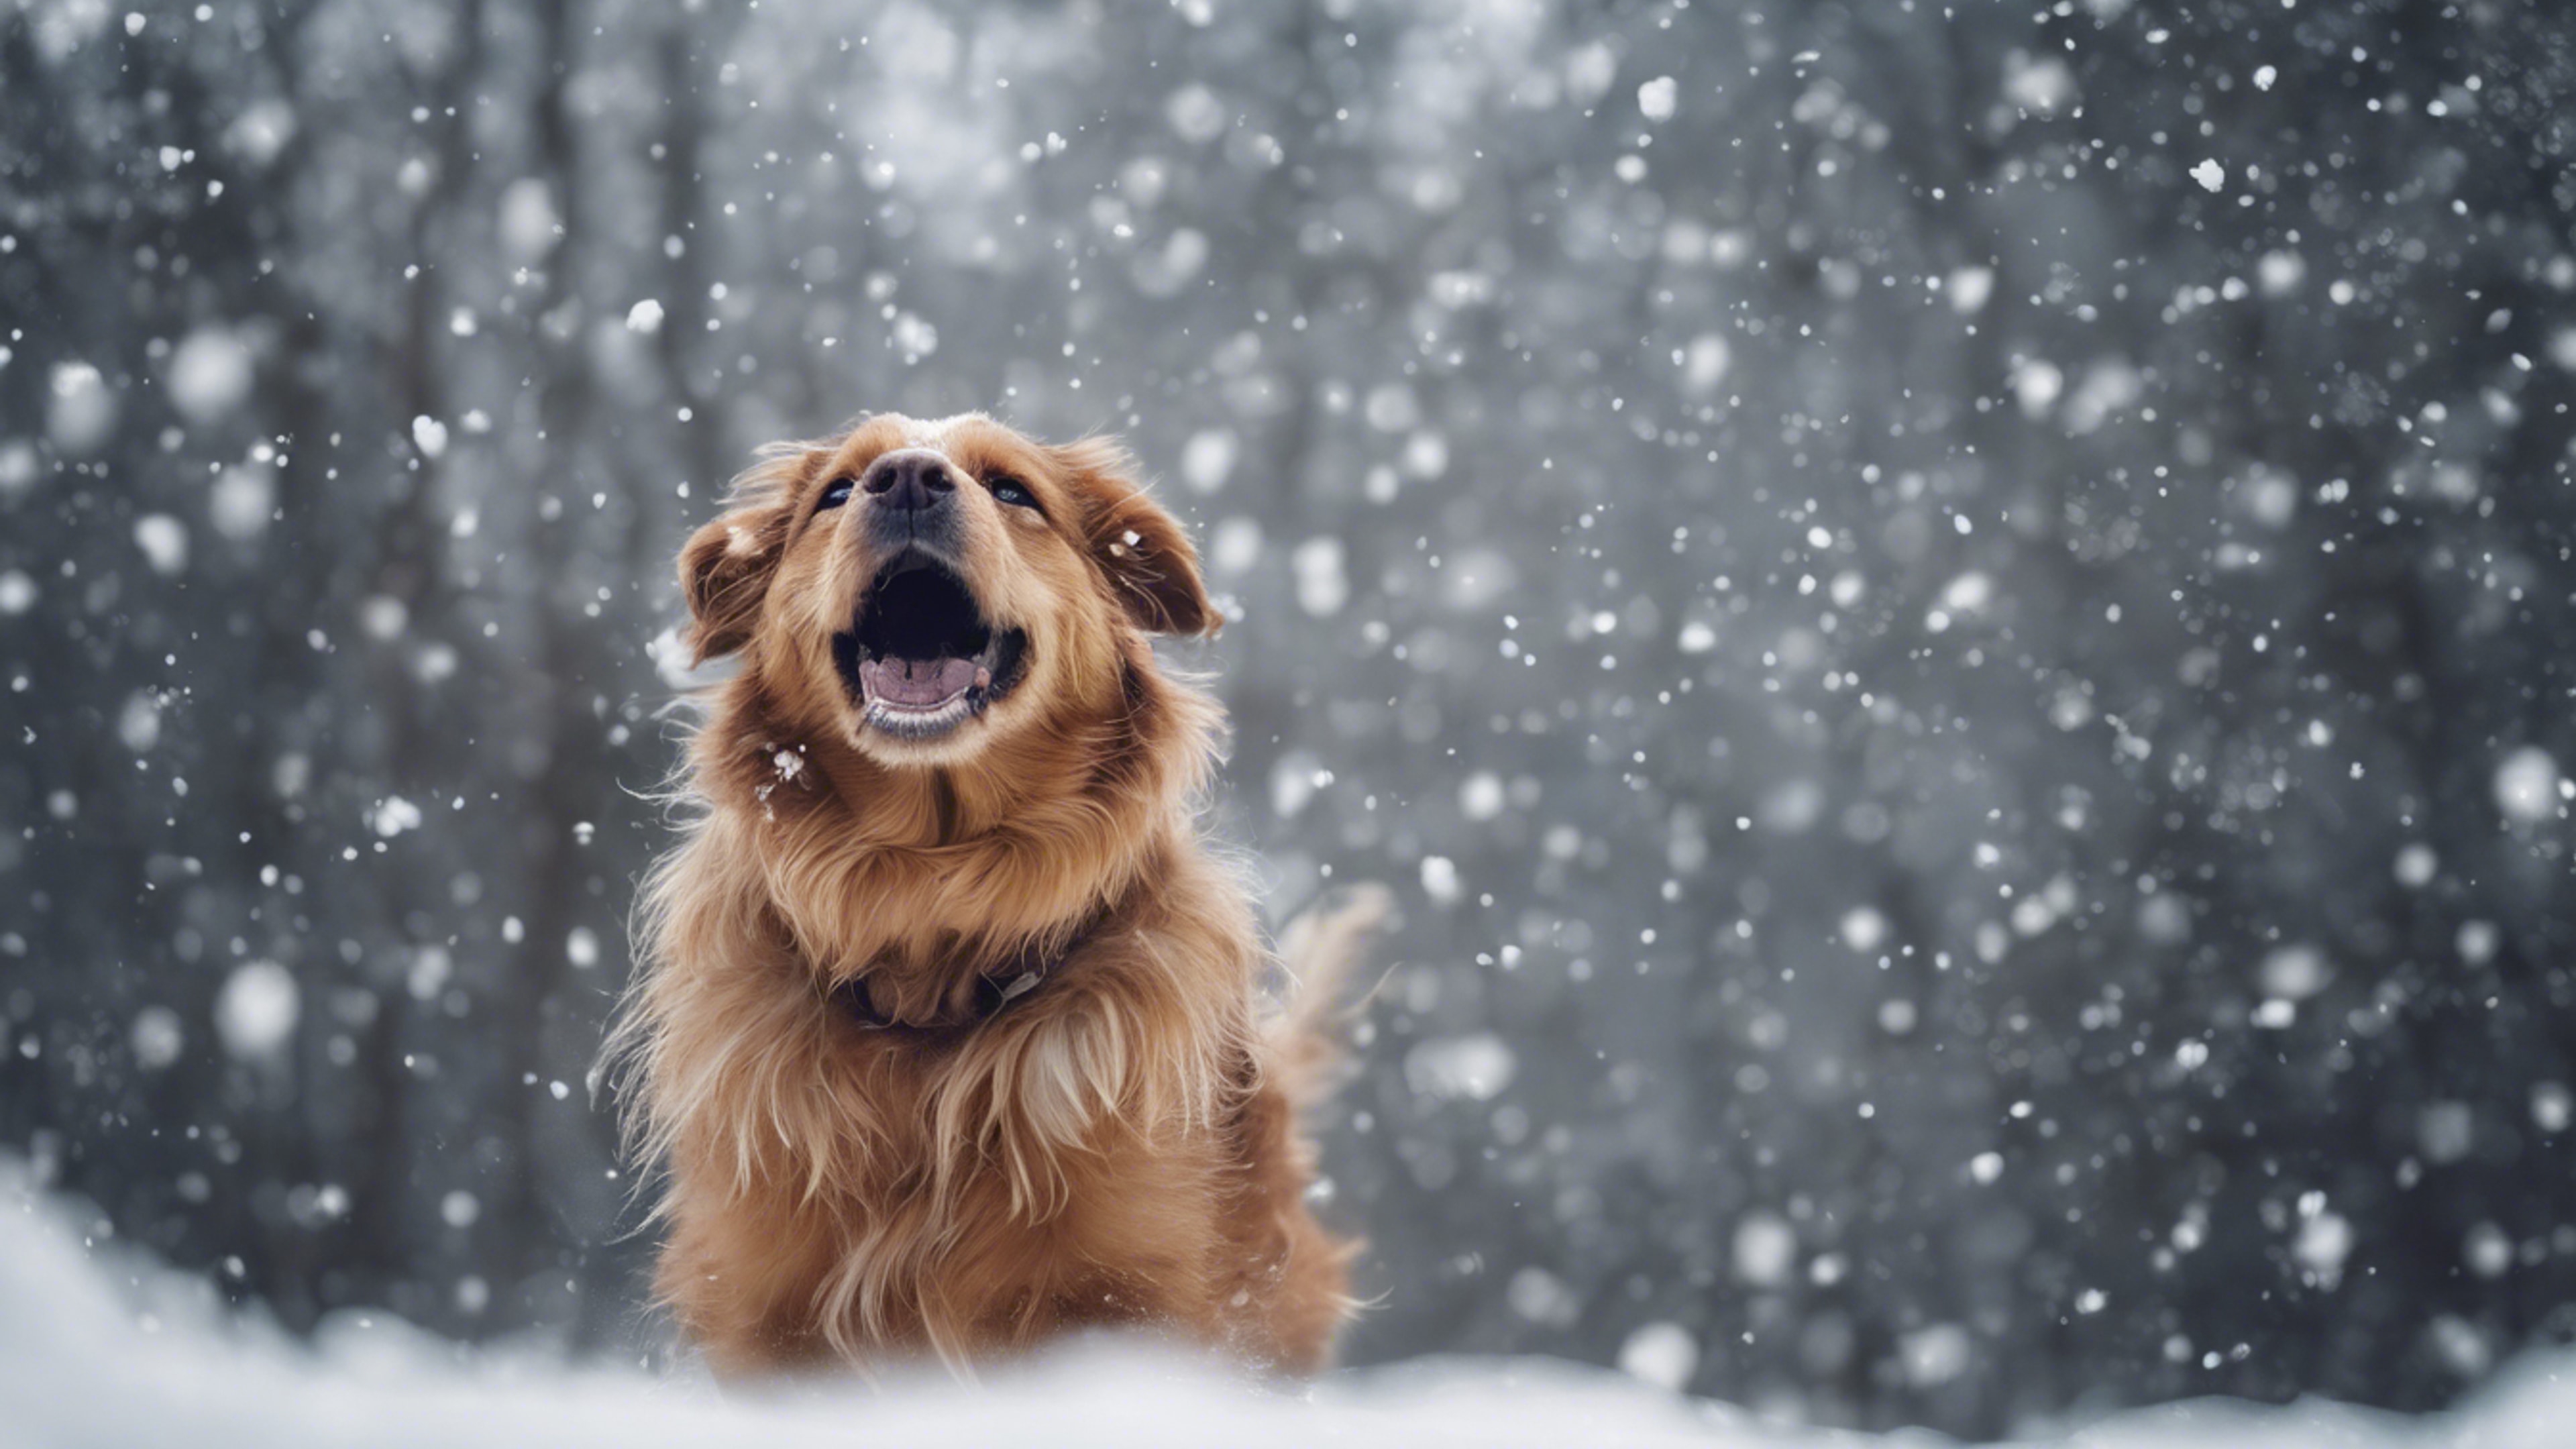 Dog playing and trying to catch falling snowflakes.壁紙[15f43bf888444a478c41]